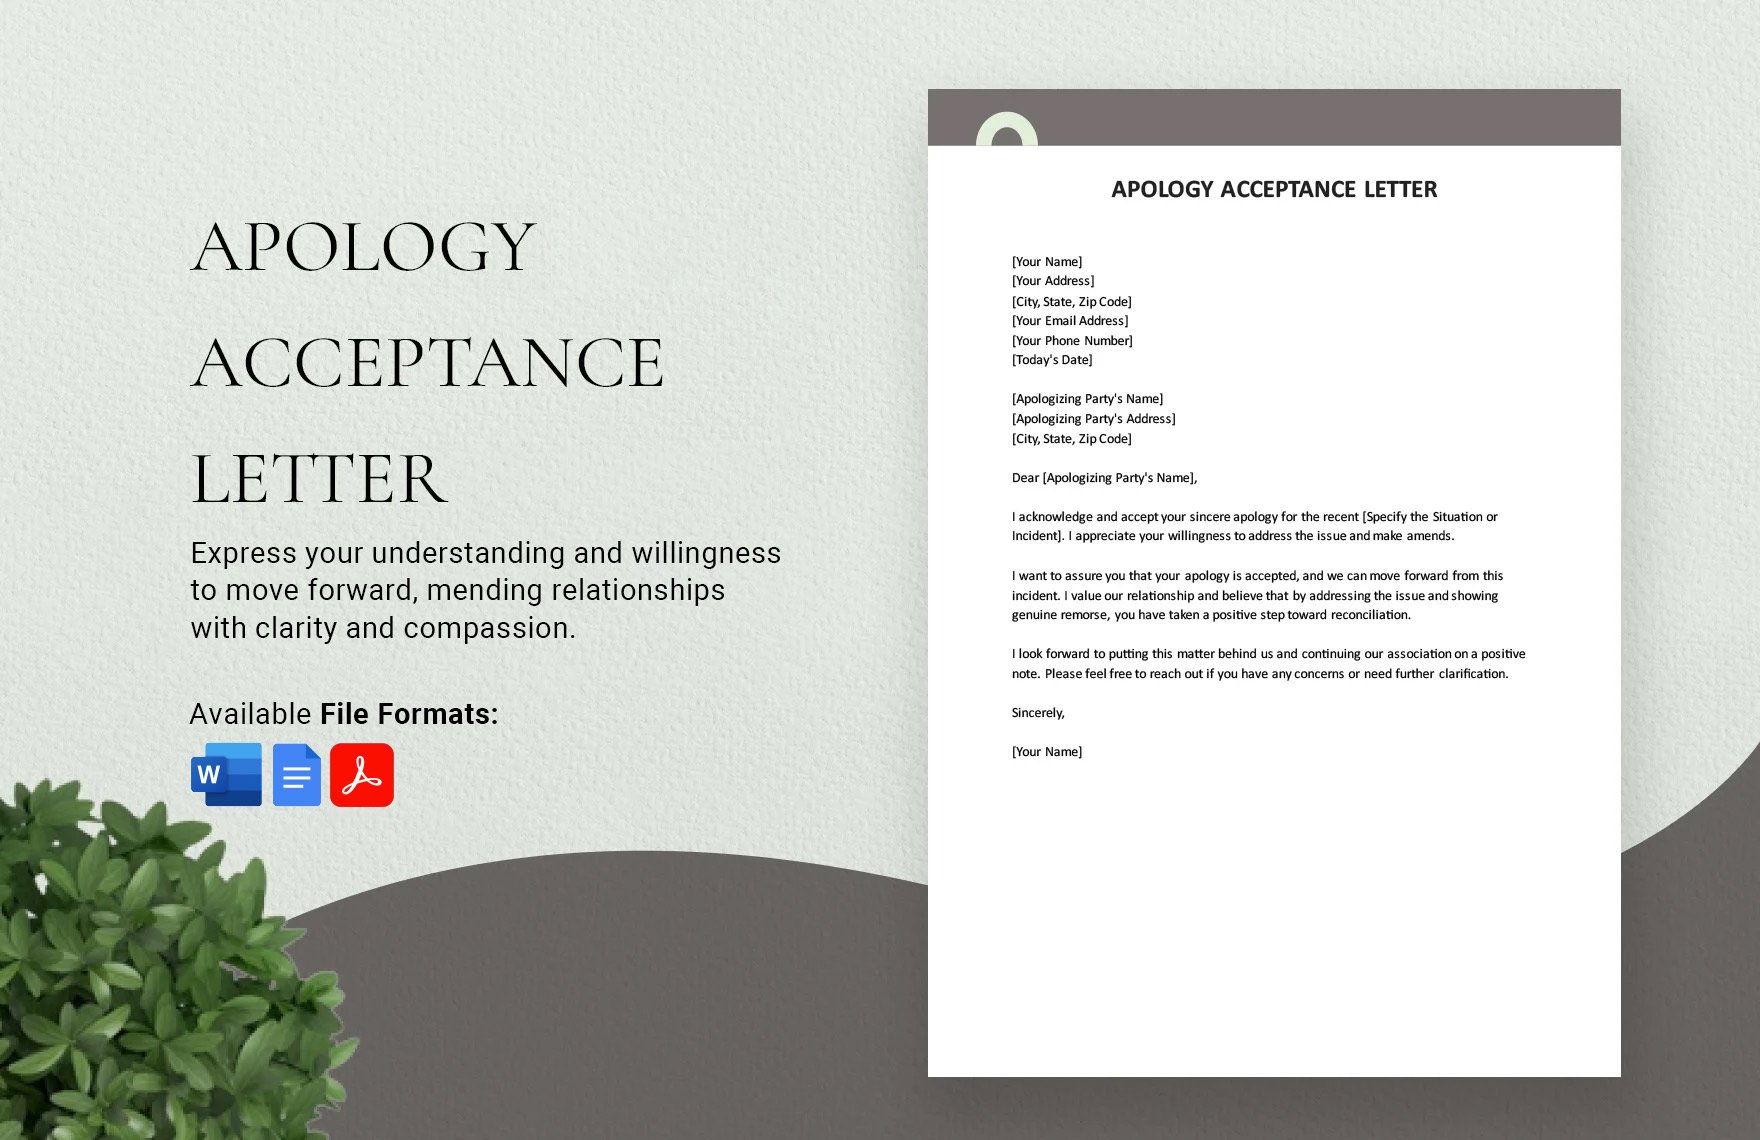 Apology Acceptance Letter